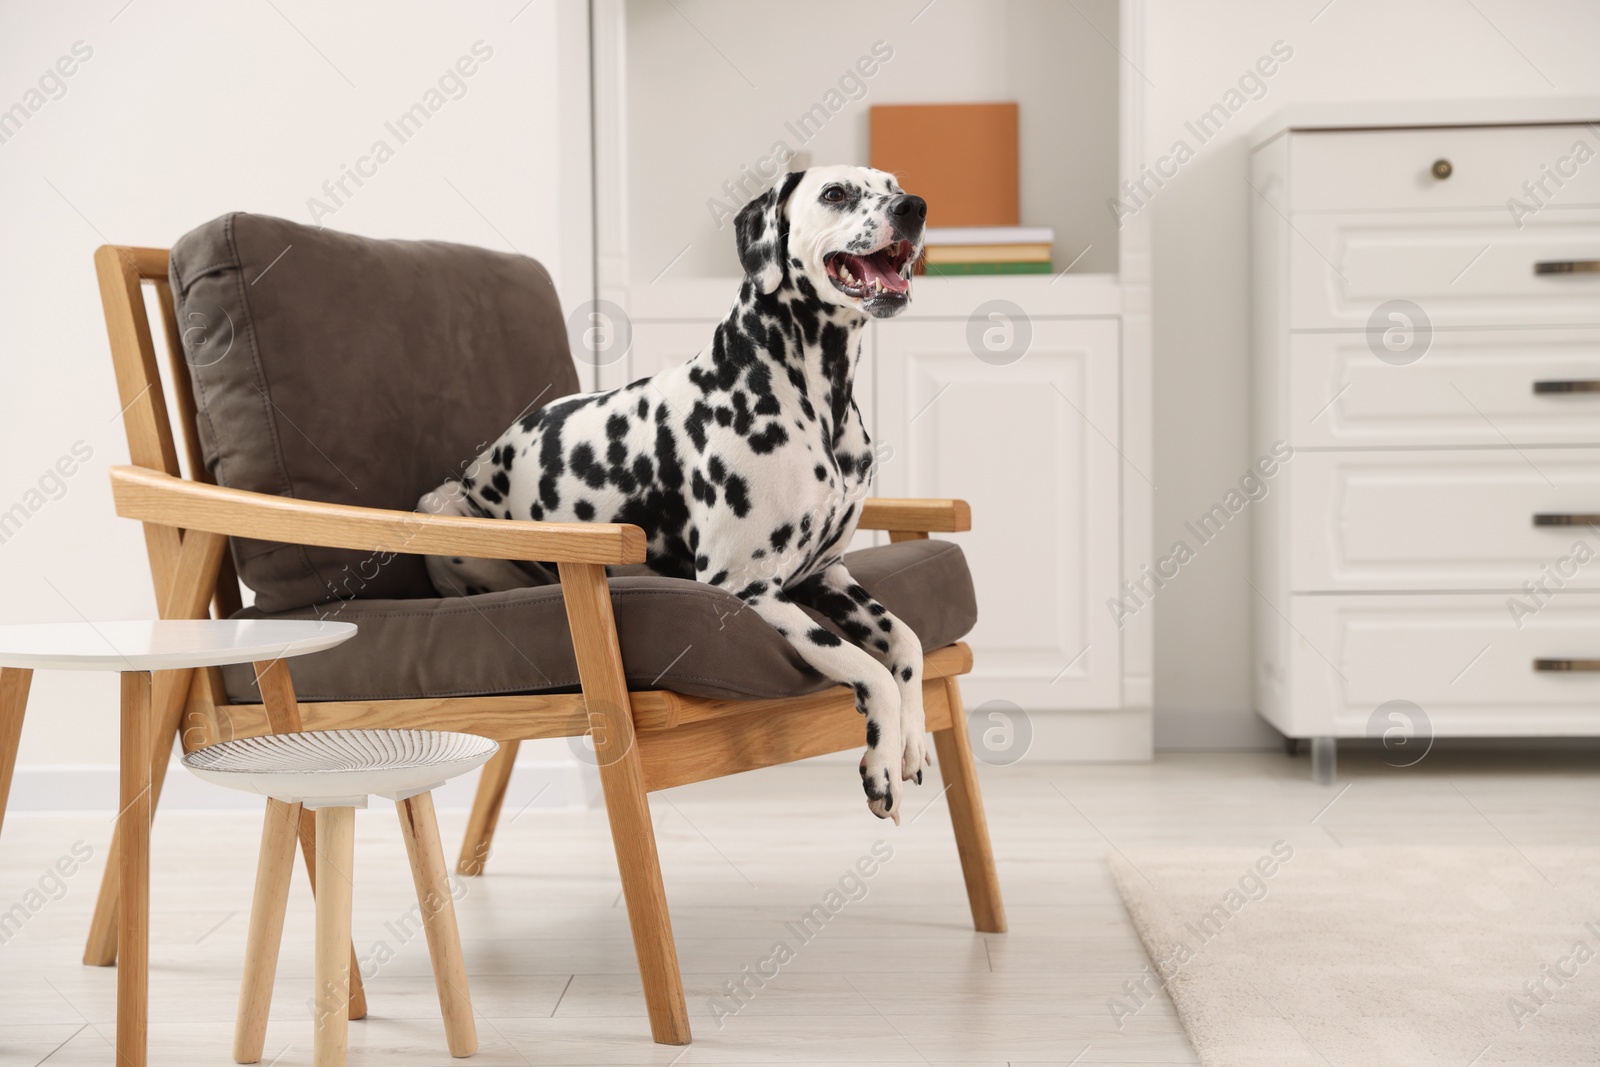 Photo of Adorable Dalmatian dog on armchair at home